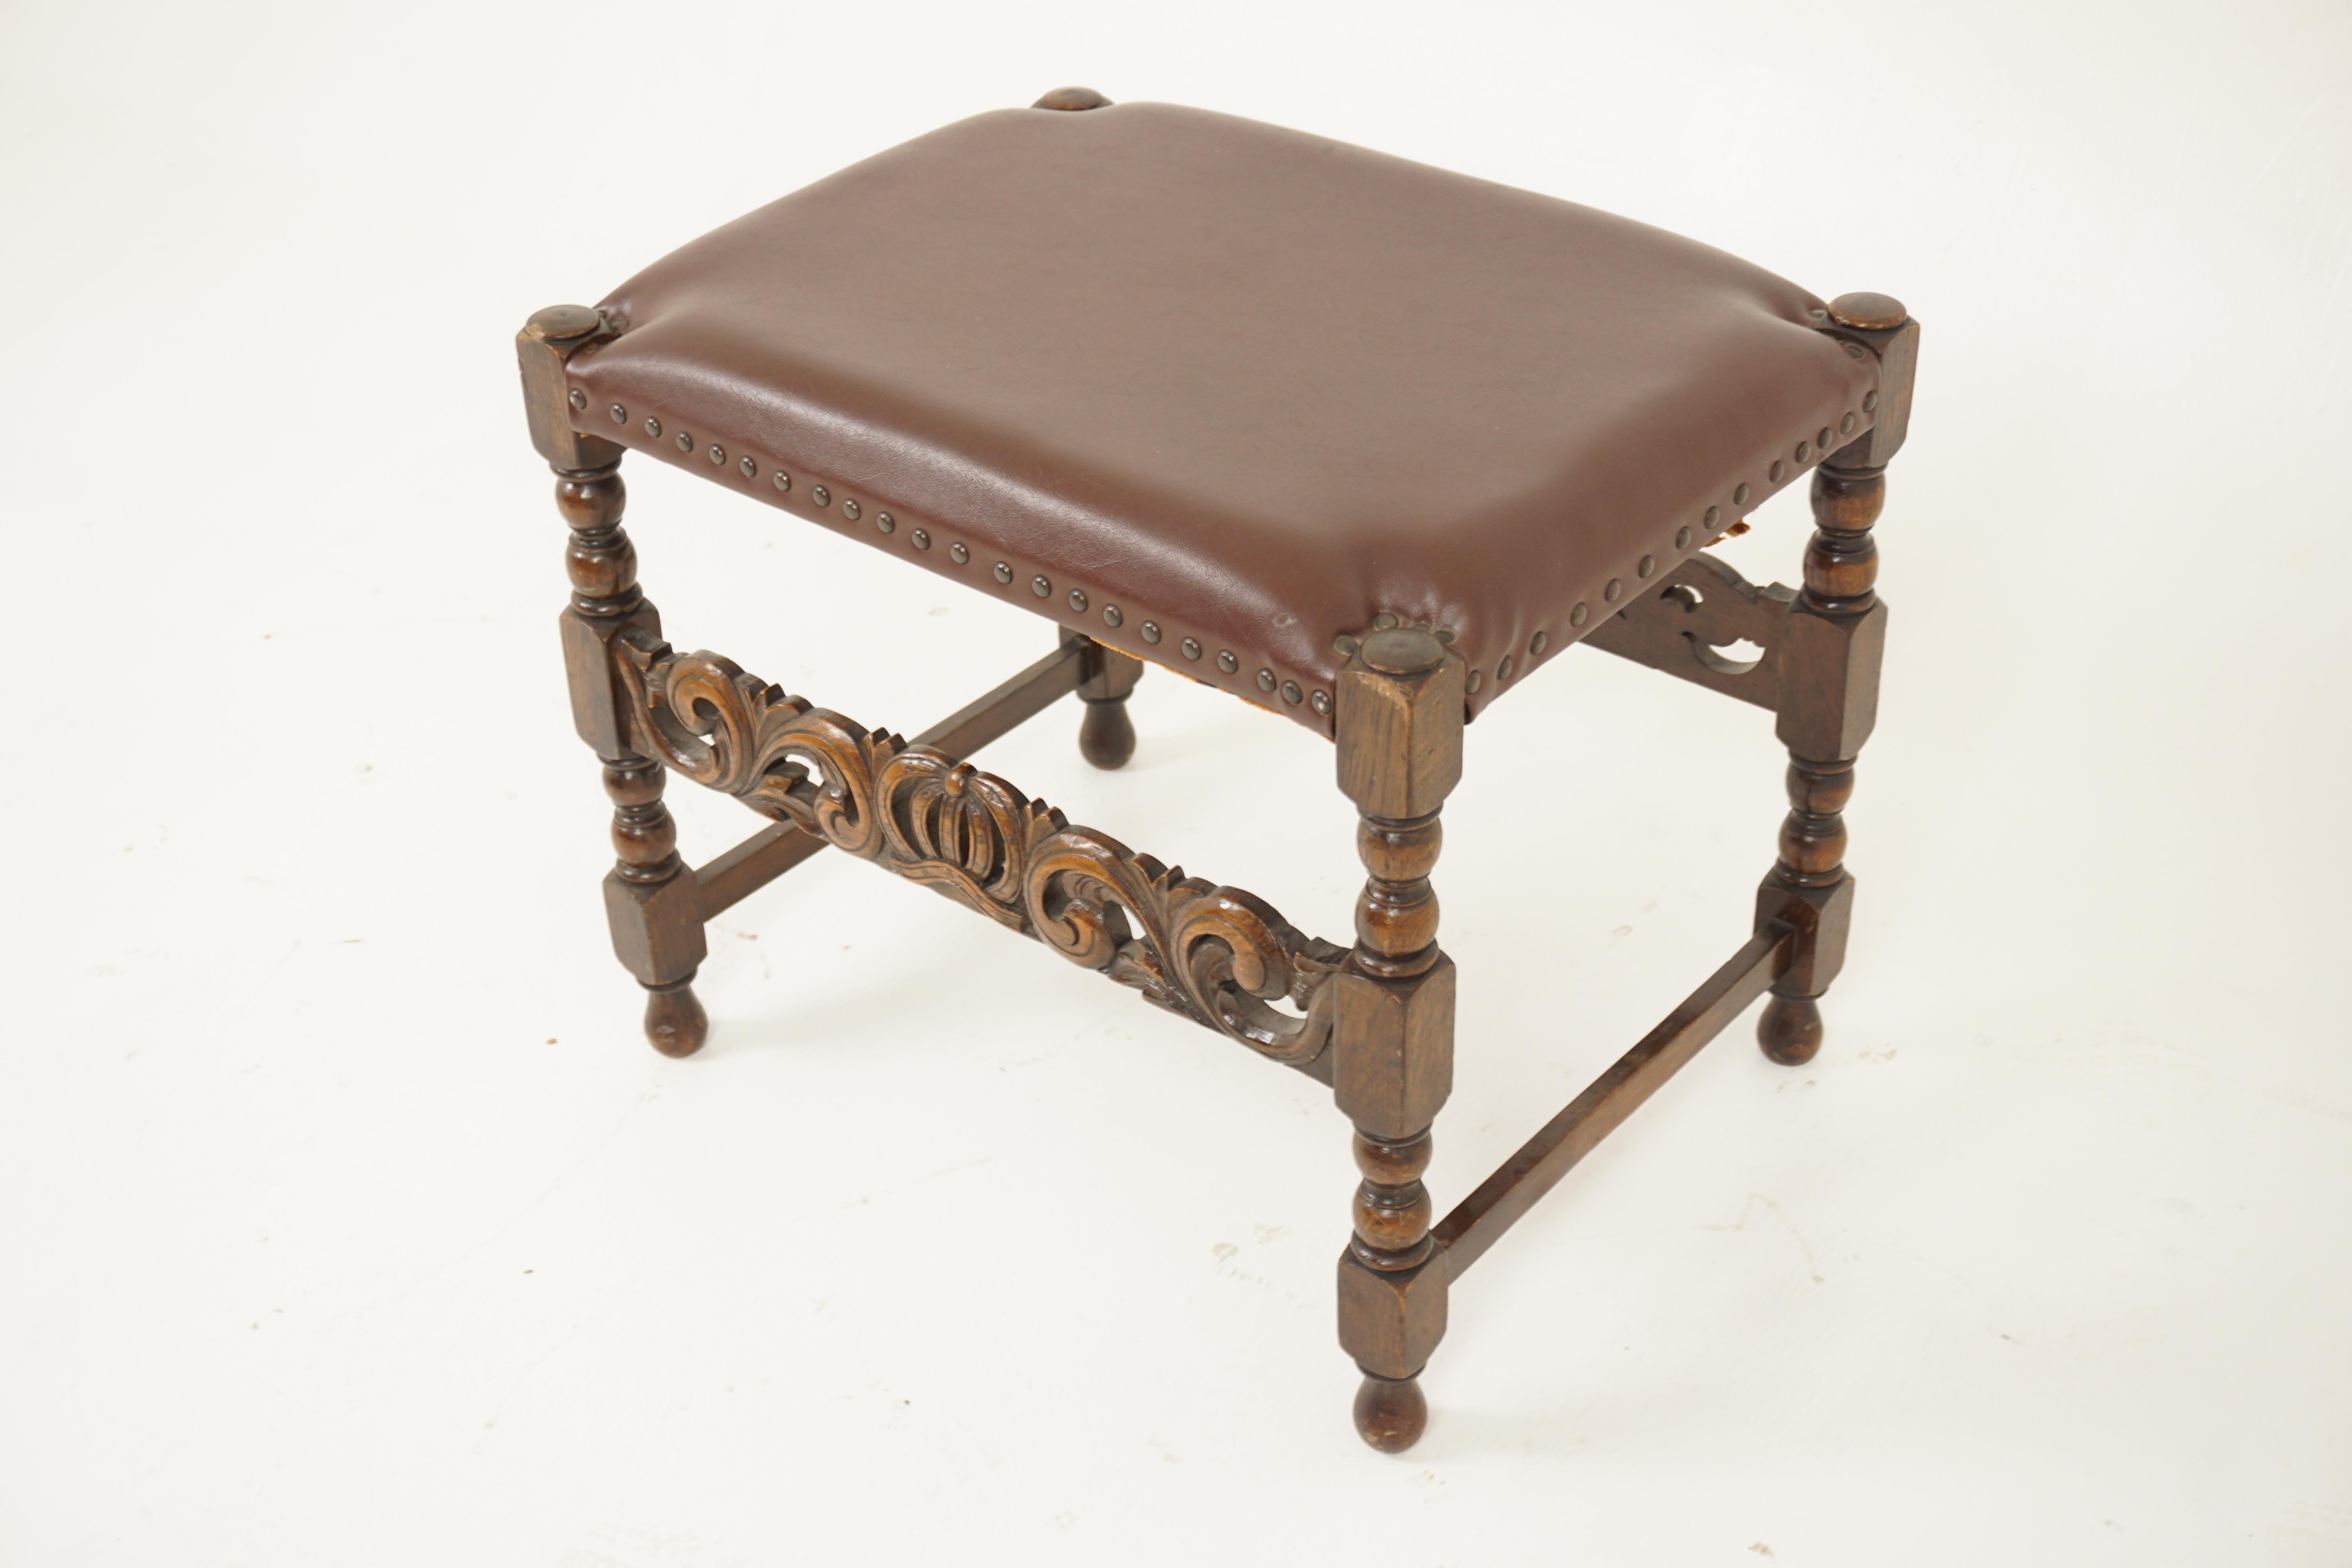 Antique Carved Oak Stool, Bench, Footstool, Scotland 1920, H1155

Scotland 1920
Solid Oak
Original finish
Rectangular vinyl seat with studs
All standing on turned legs and connected by a pair of carved cross stretchers
Lovely quality and in good